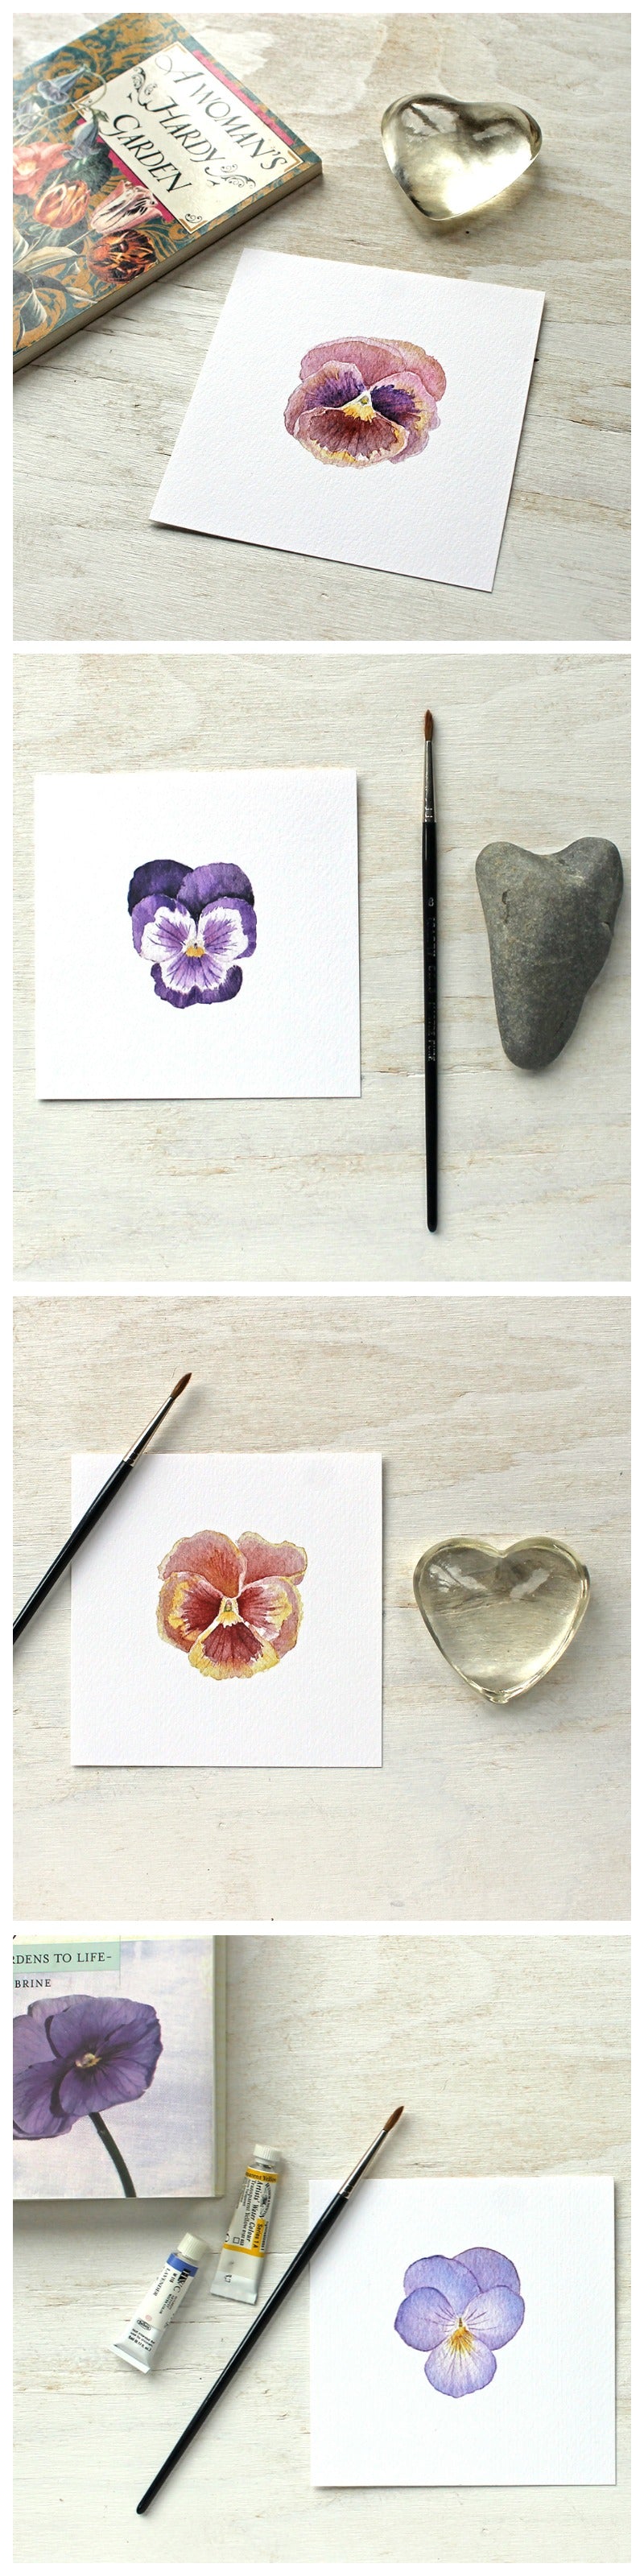 A set of four pansy blossom art prints. Watercolor paintings by Kathleen Maunder.